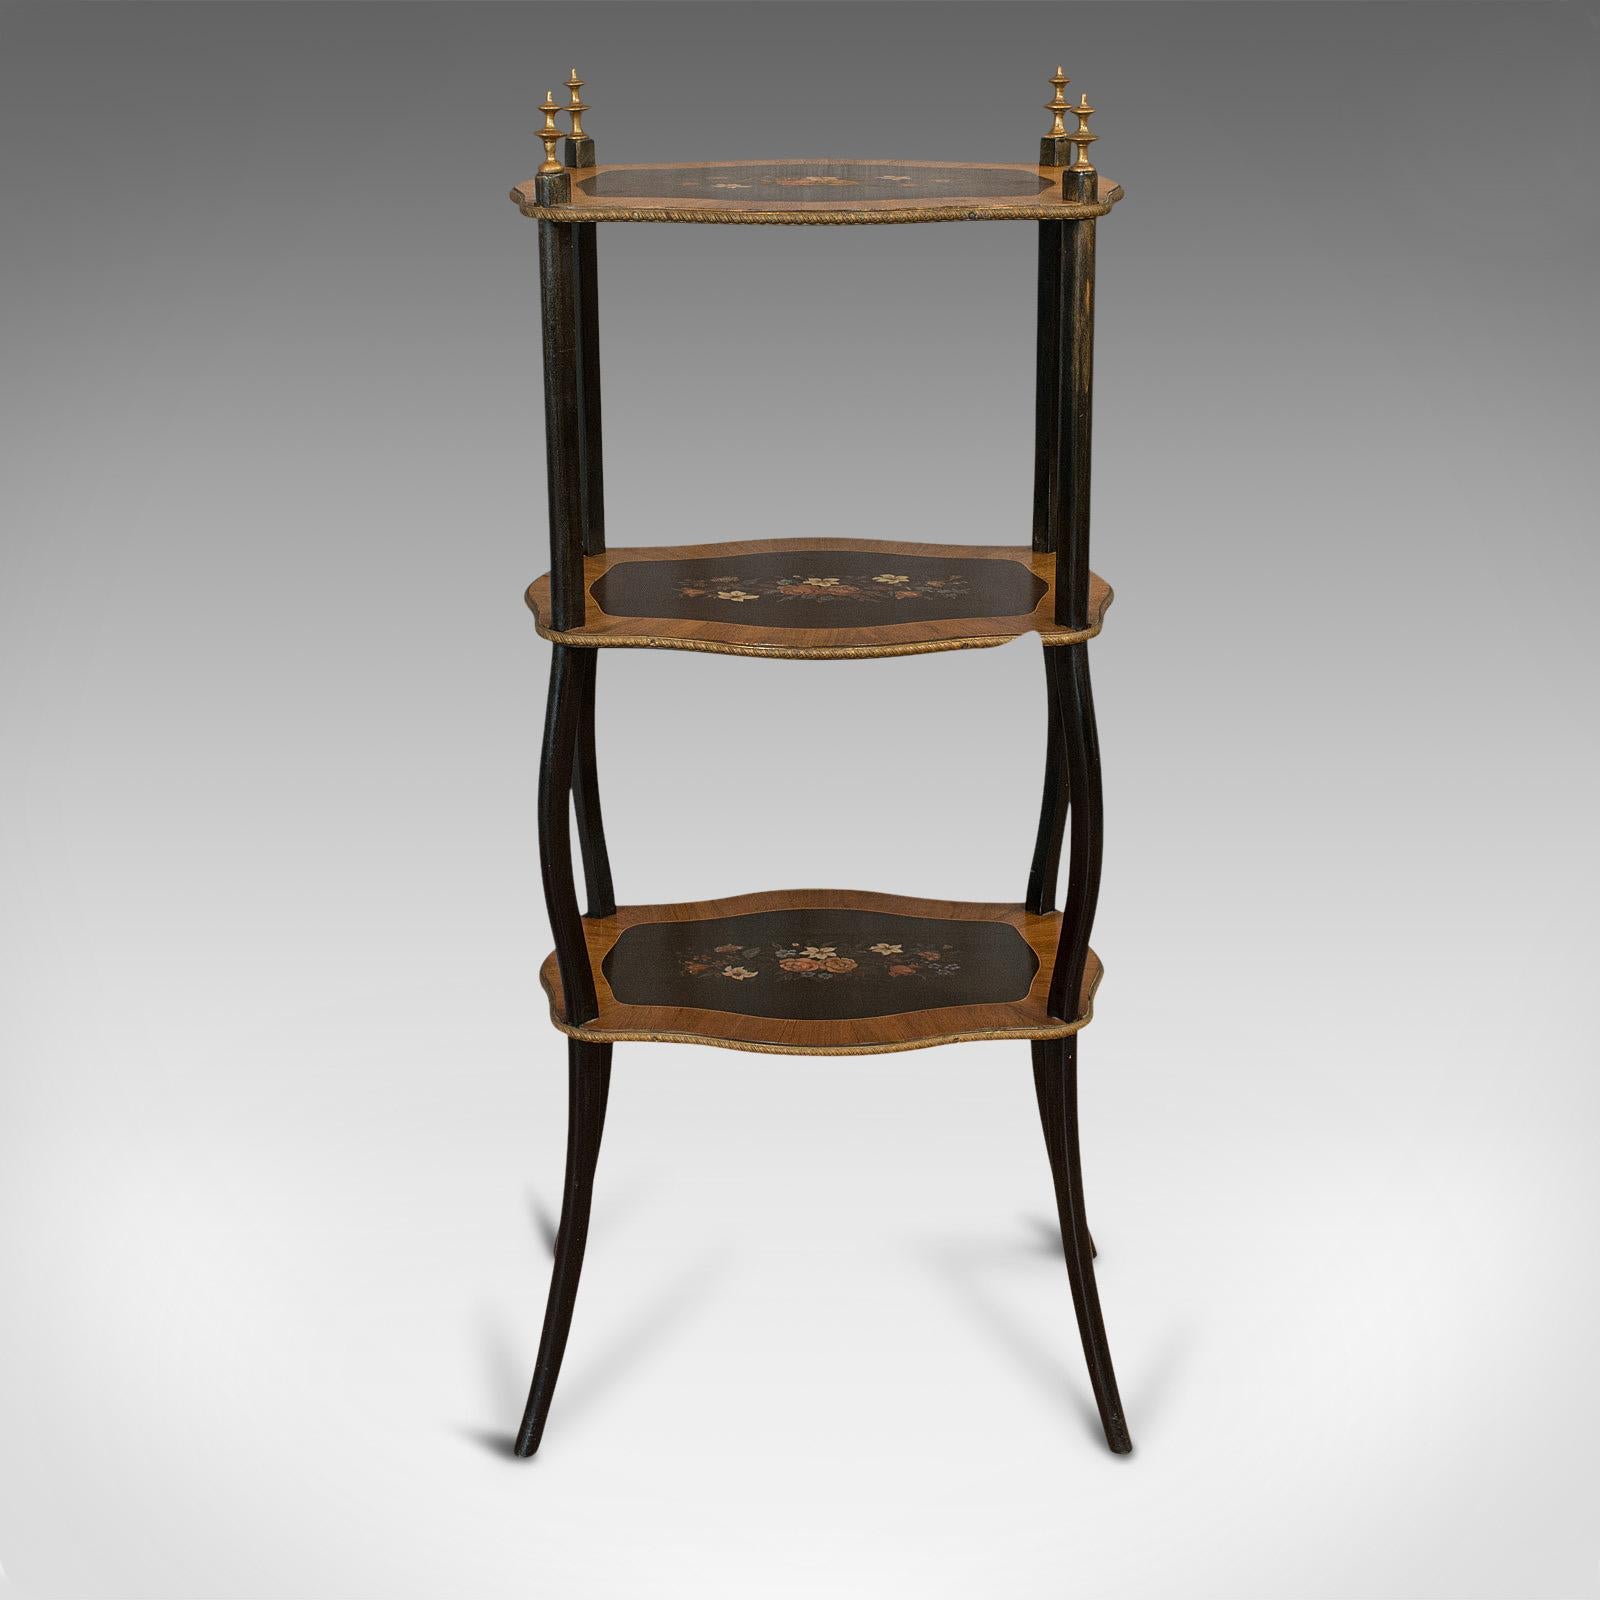 This is an antique étagère. A French, mahogany three-tier plant stand or whatnot, dating to the late Victorian period, circa 1900.

Delightful figuring and hand-finished touches
Displays a desirable aged patina
Mahogany crossbanding to each